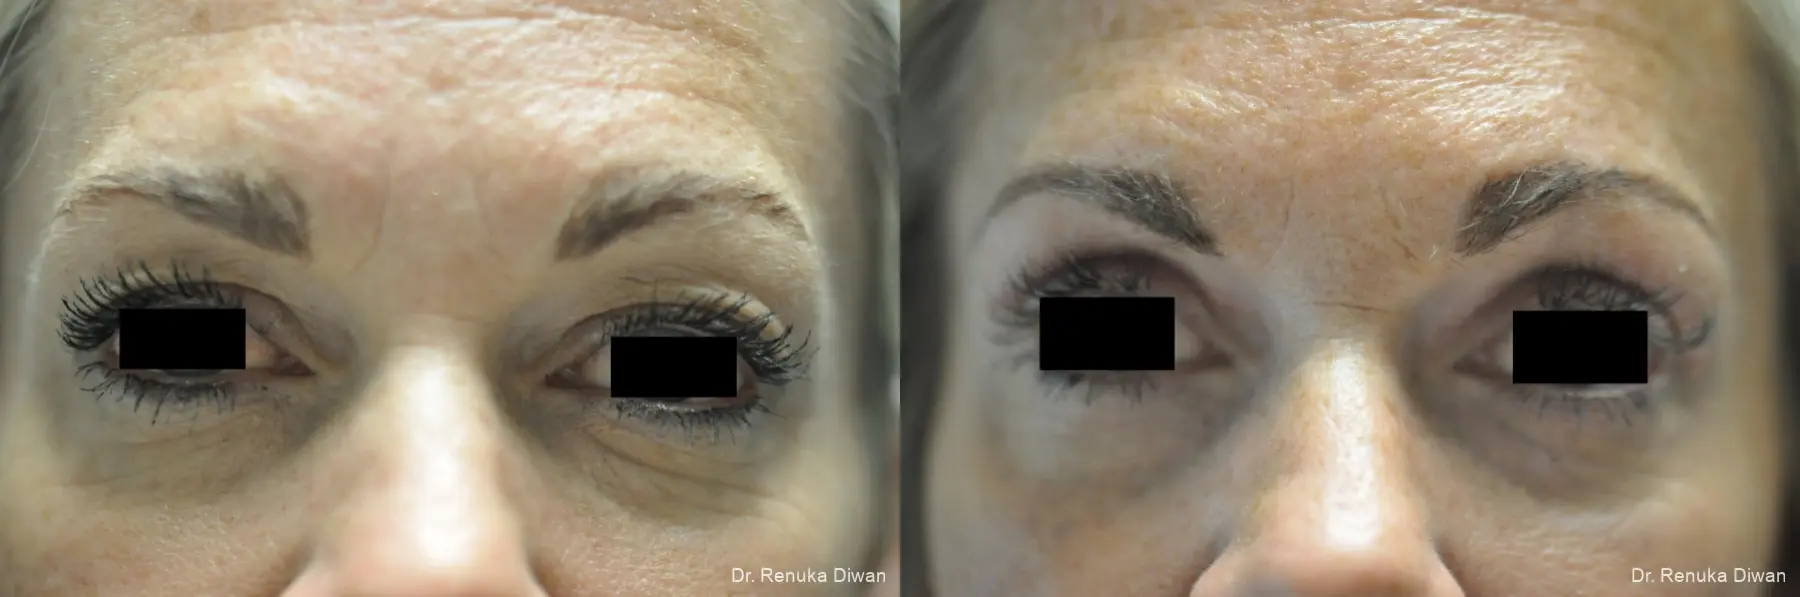 Blepharoplasty: Patient 1 - Before and After 3